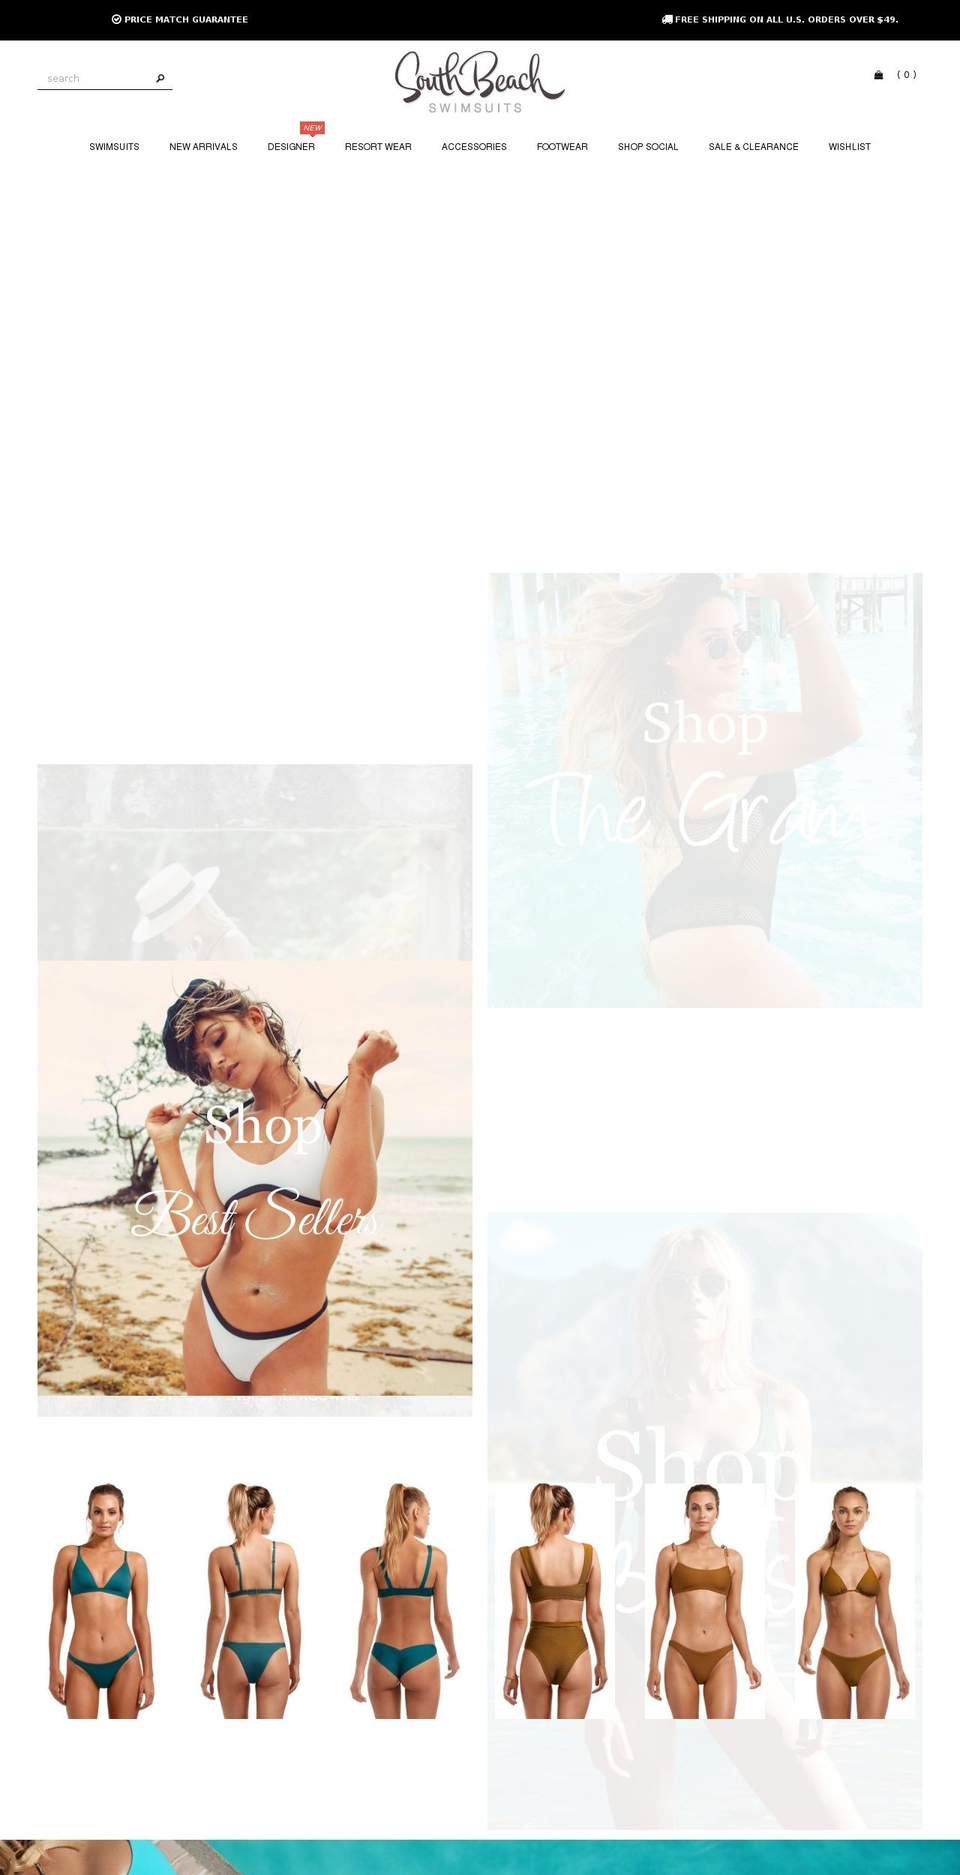 Made With ❤ By Minion Made - Updated Checkout Shopify theme site example southbeachswimsuits.style